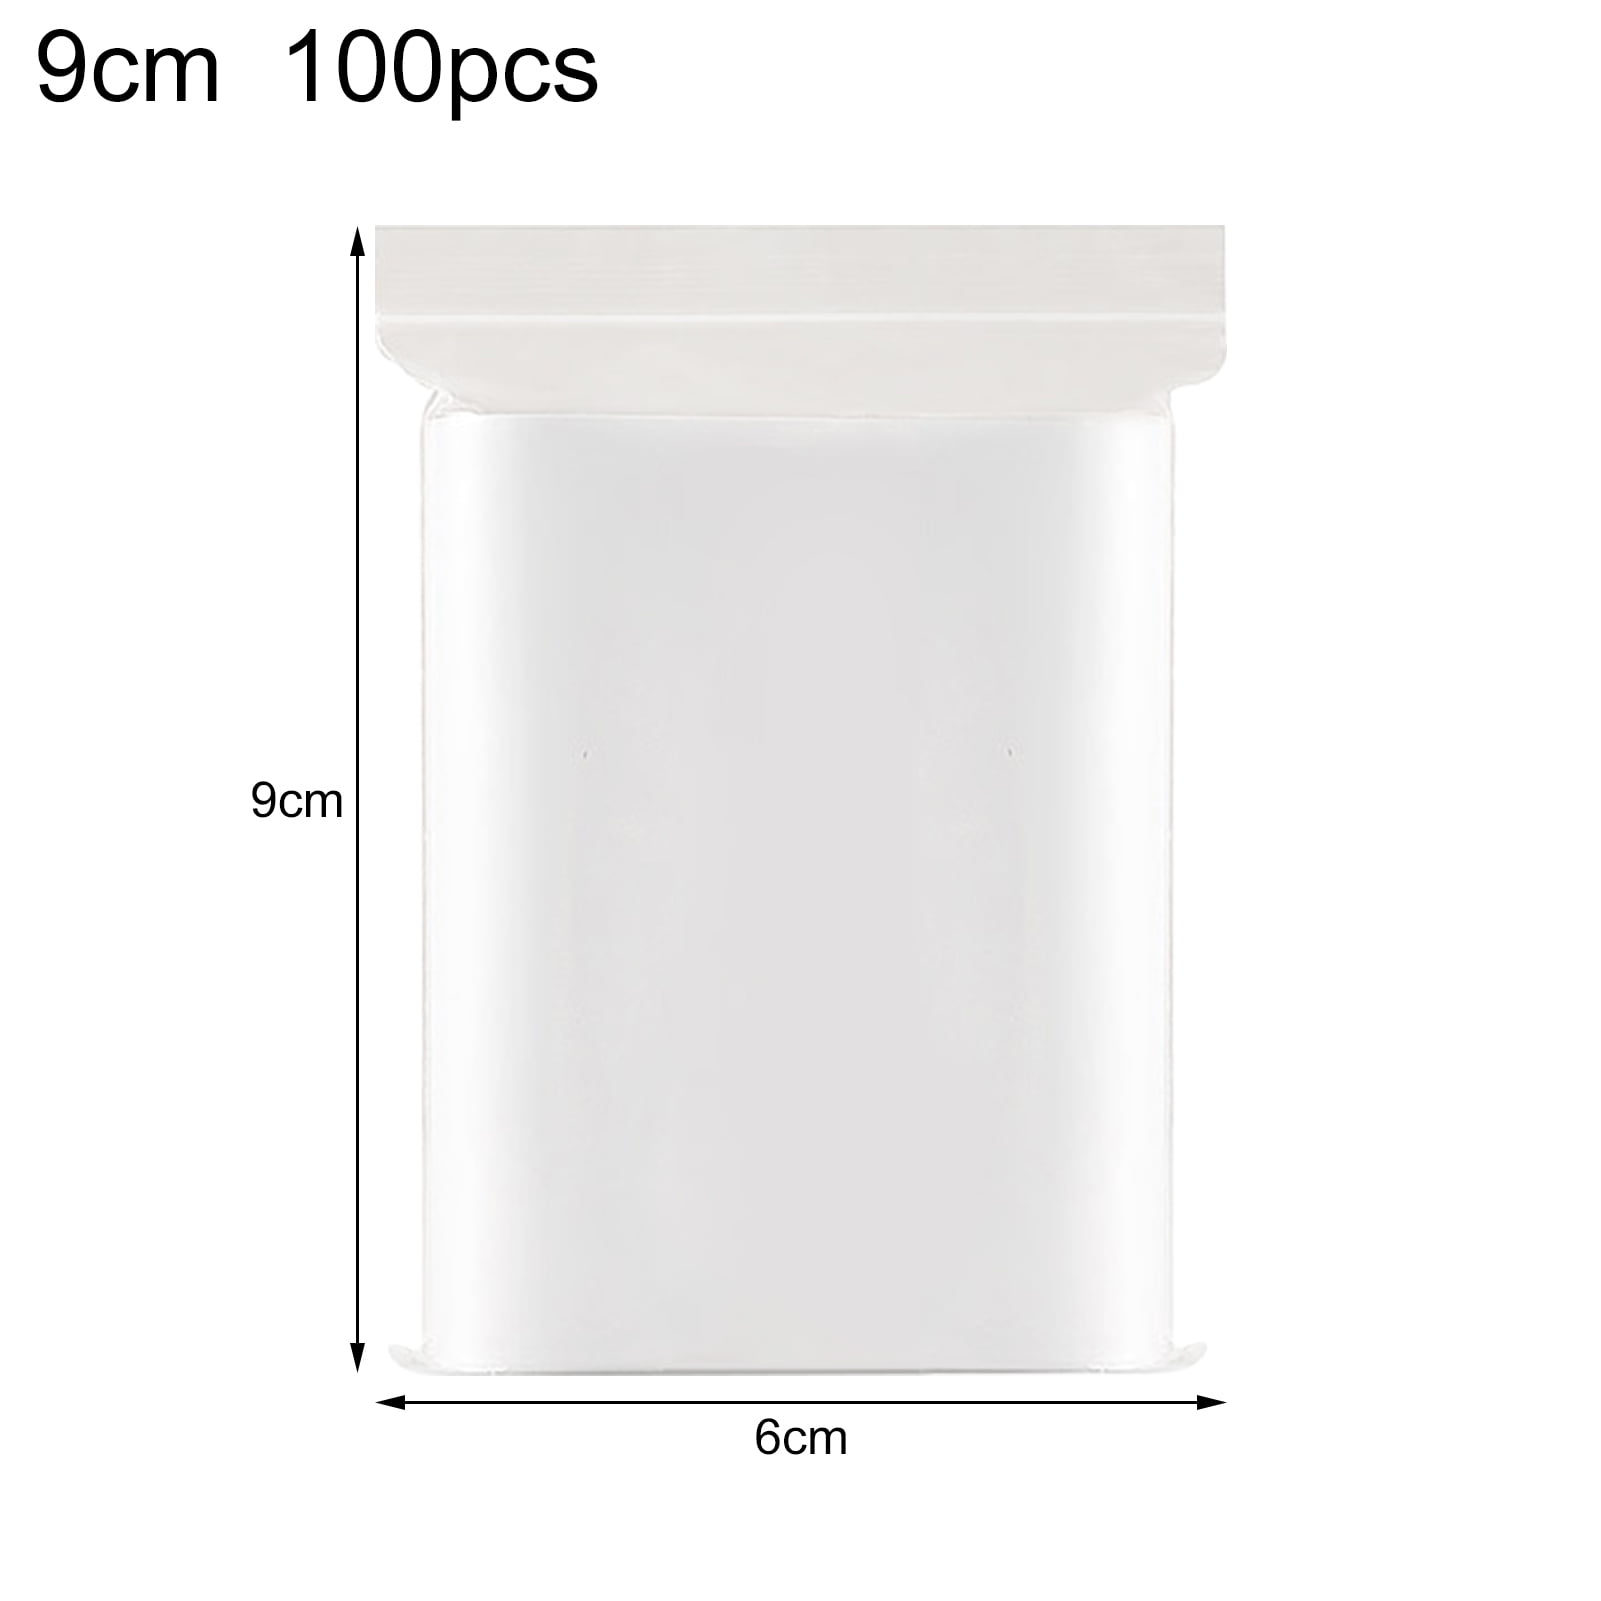 400 pcs 3.5 x 3.3 Inch Clear Plastic Bags Resealable Adhesive Cello/ Cellophane Treat Bags Self Sealing OPP Bags for Bakery Soap Cookies Gifts  1.3 Mil 